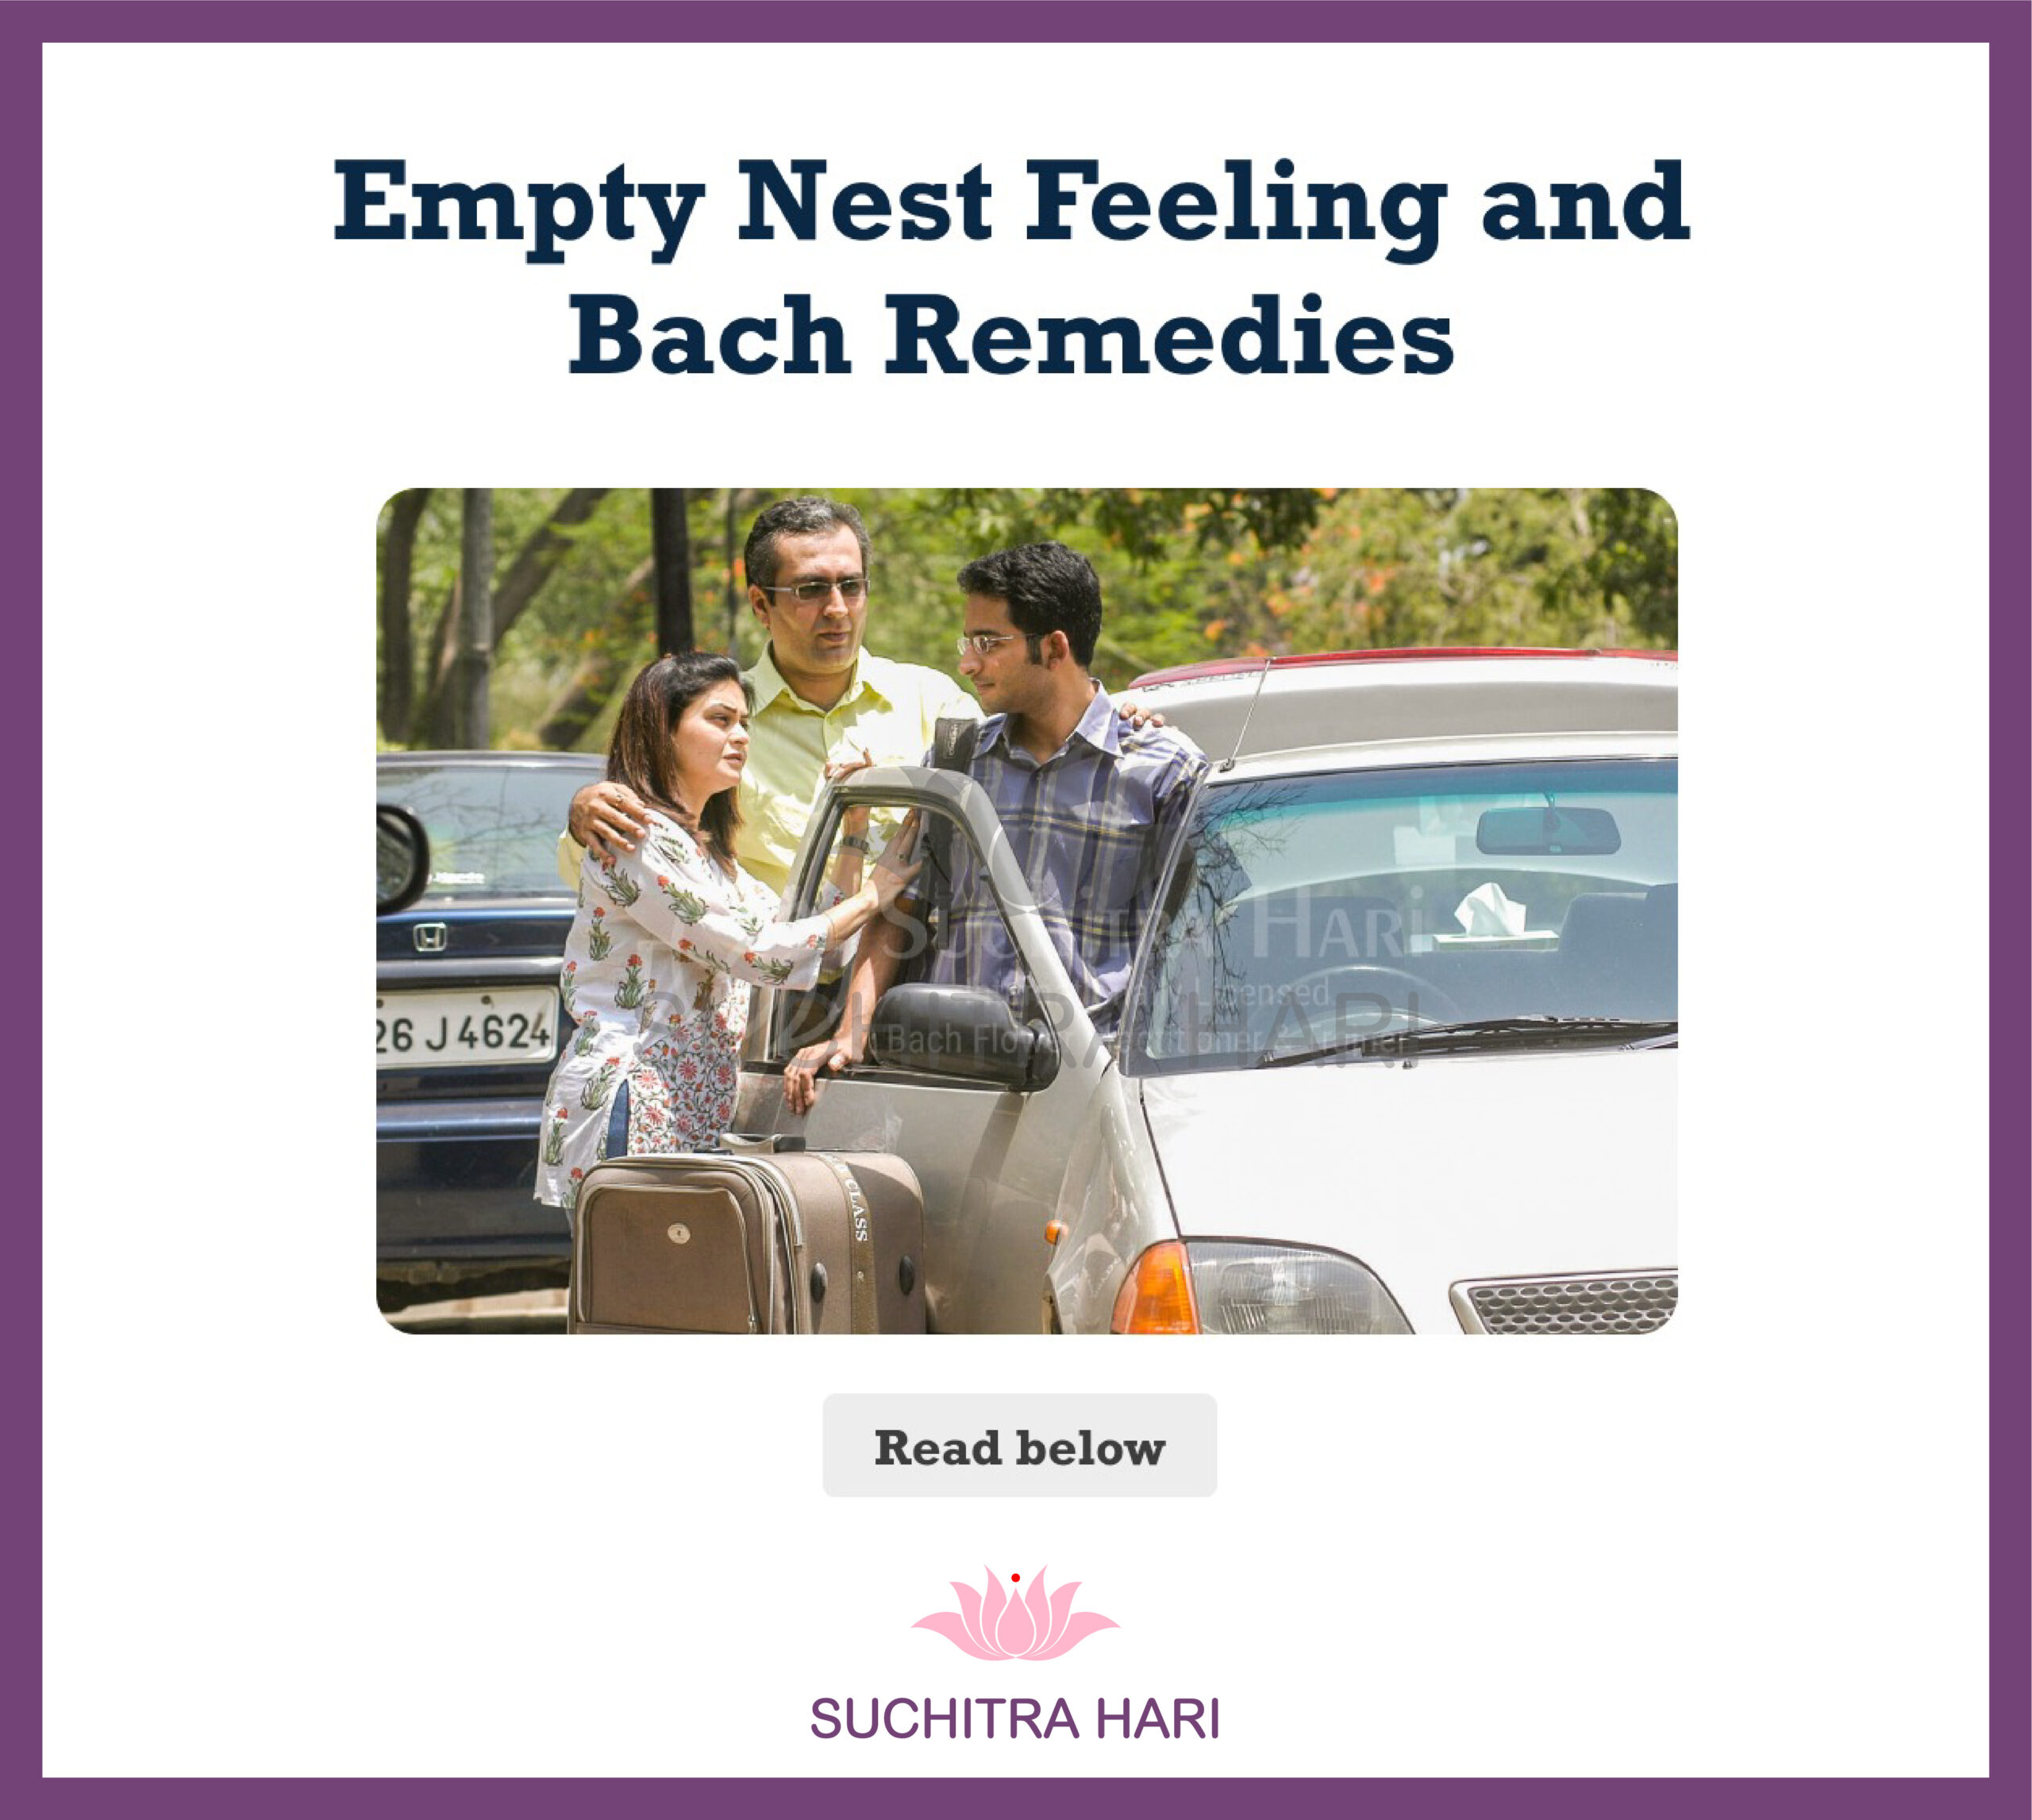 Empty Nest Feeling and Bach Remedies